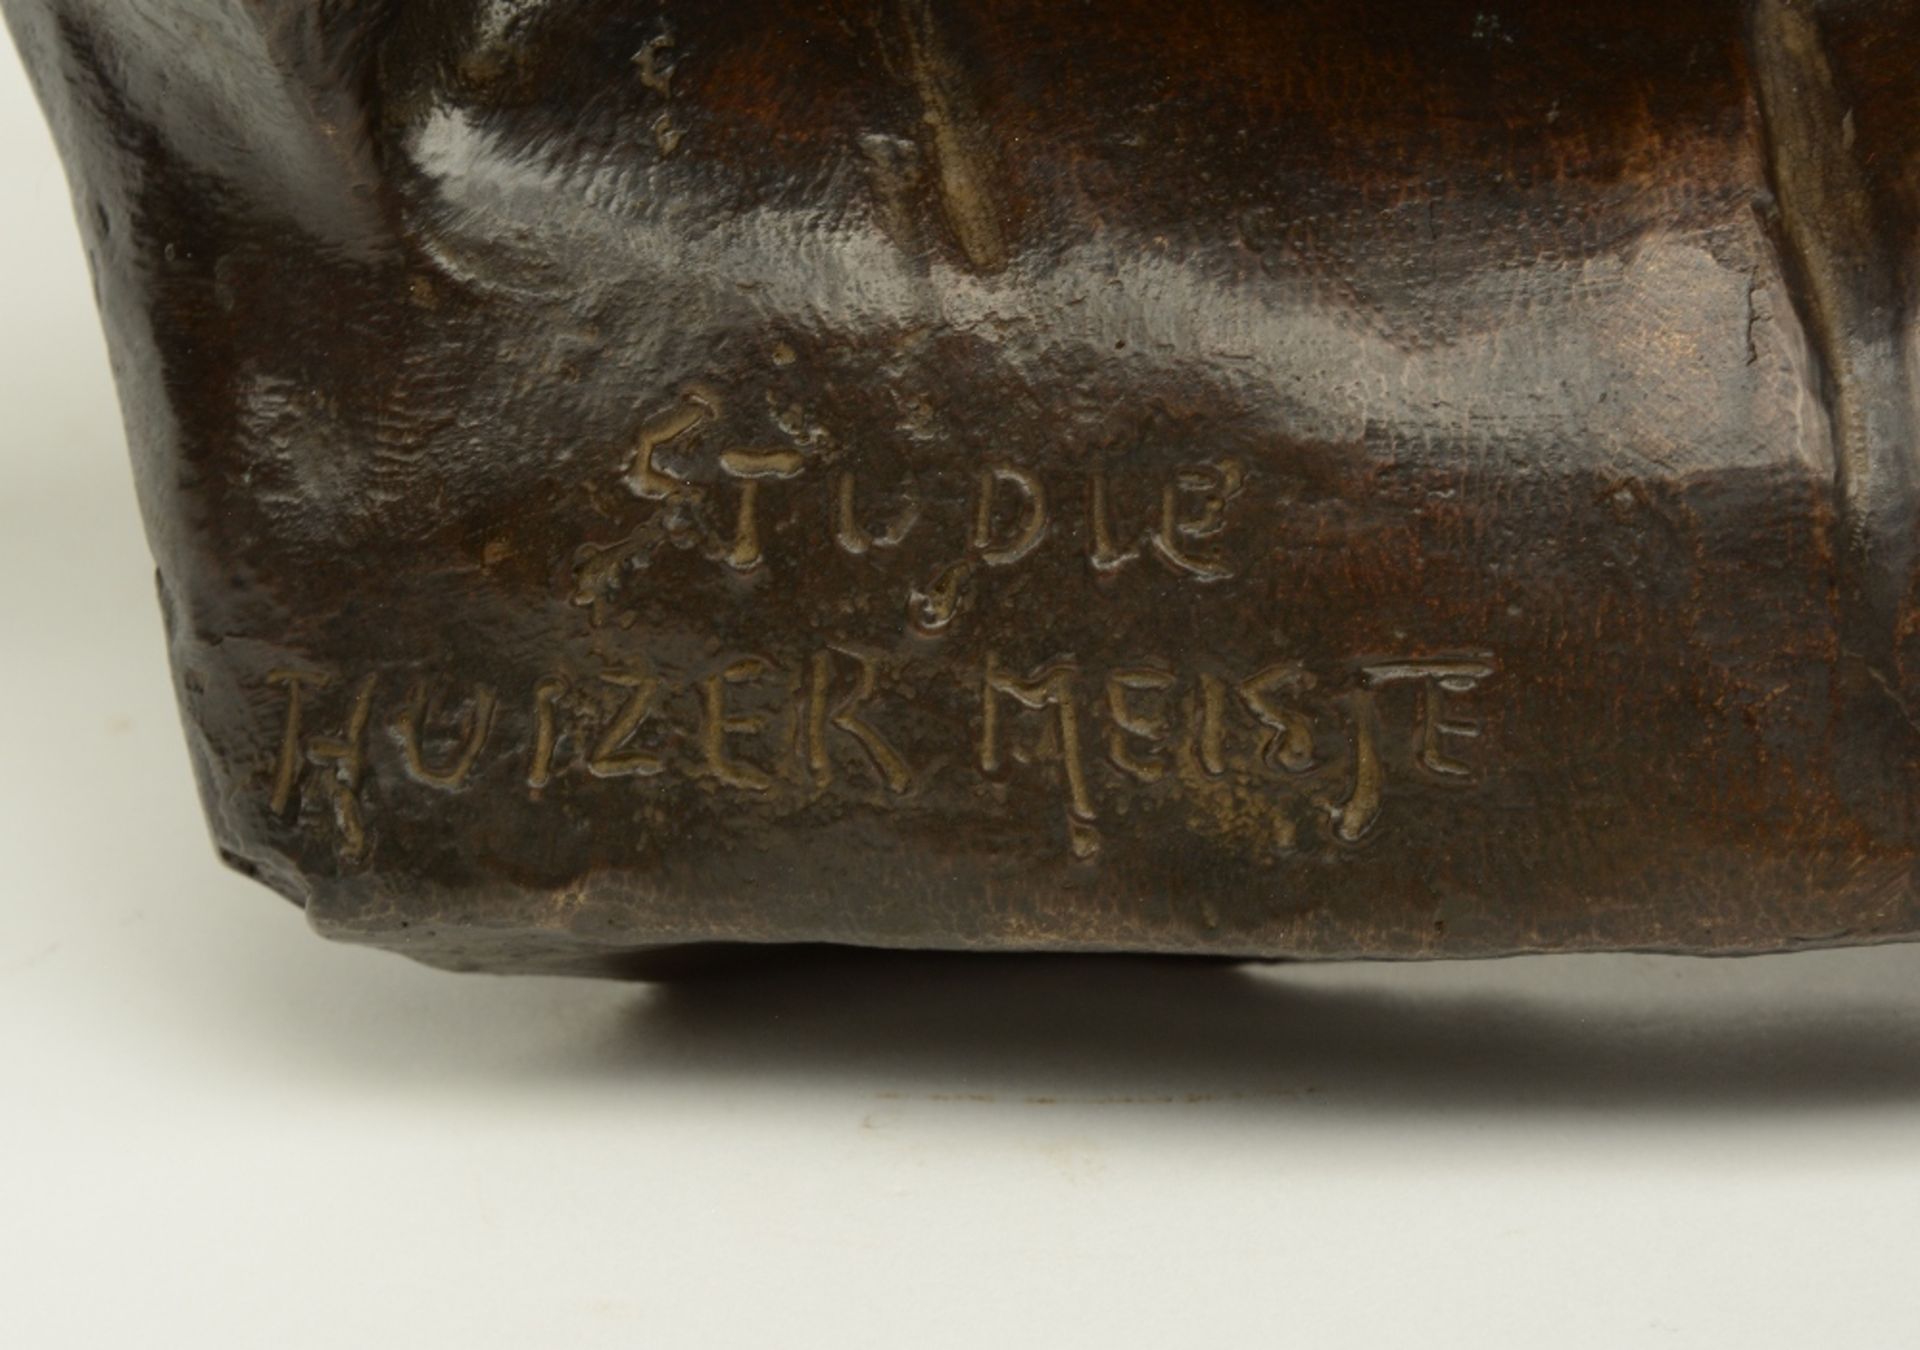 (I.M. da Costa), signed and monogramed by the artist, 'Studie Huizer meisje' (Study Huizer girl), - Image 6 of 8